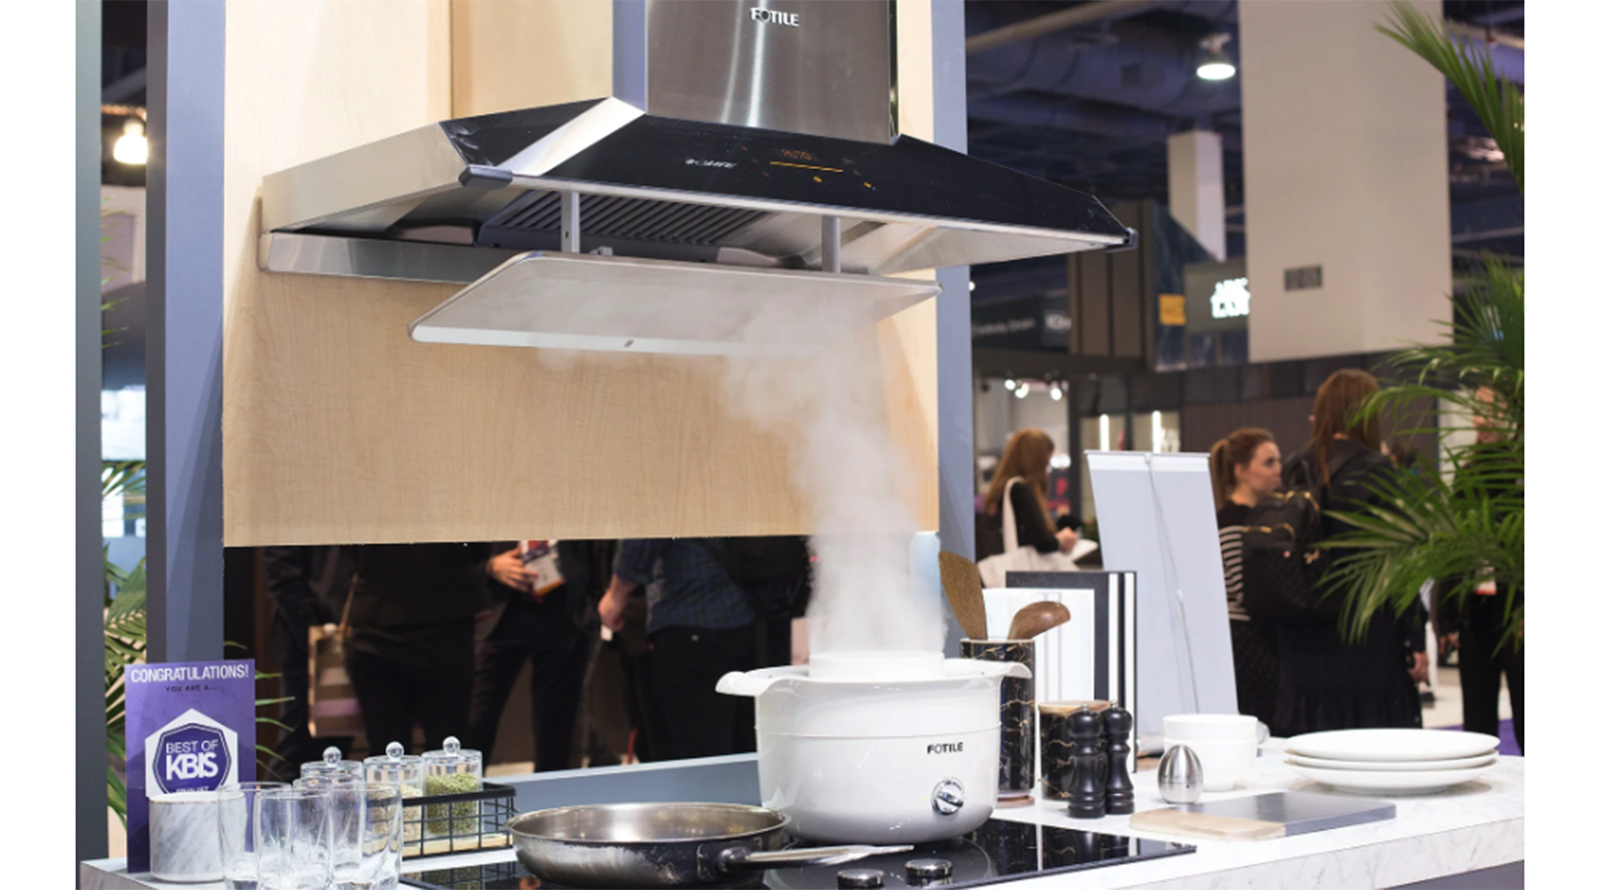 GE, Fotile Win Best of Show at KBIS - YourSource News